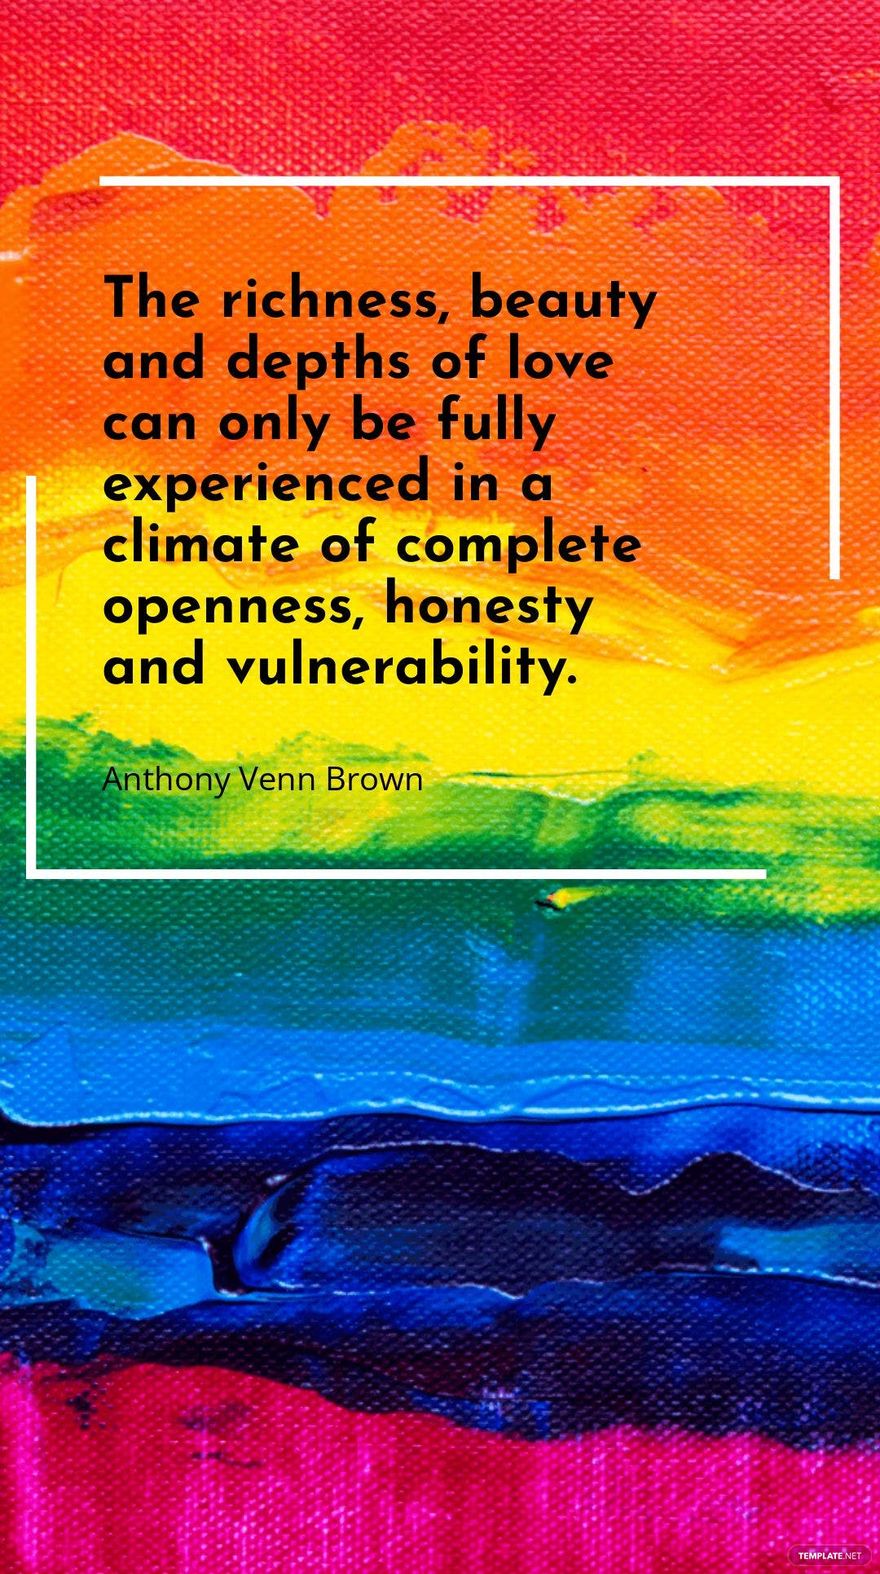 Free Anthony Venn Brown - The richness, beauty and depths of love can only be fully experienced in a climate of complete openness, honesty and vulnerability.